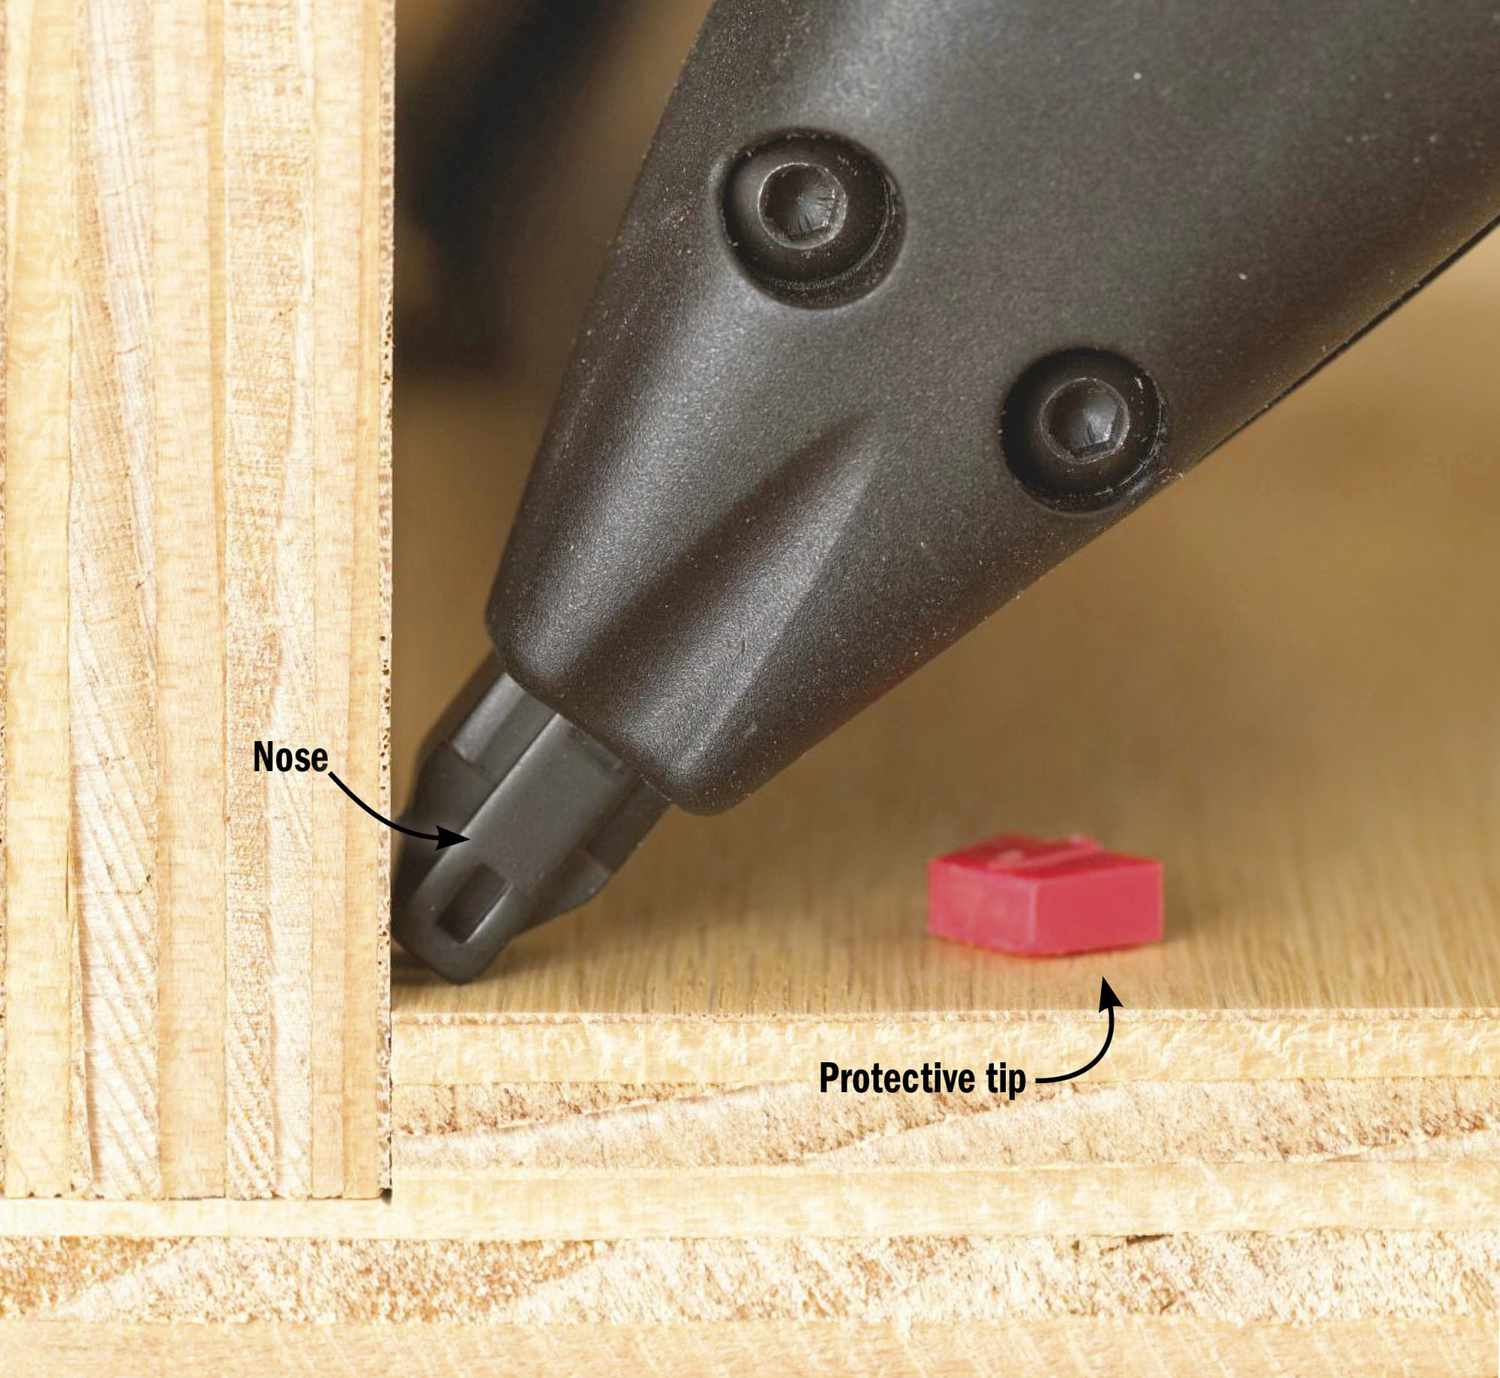 Photo of nailer with protective tip removed